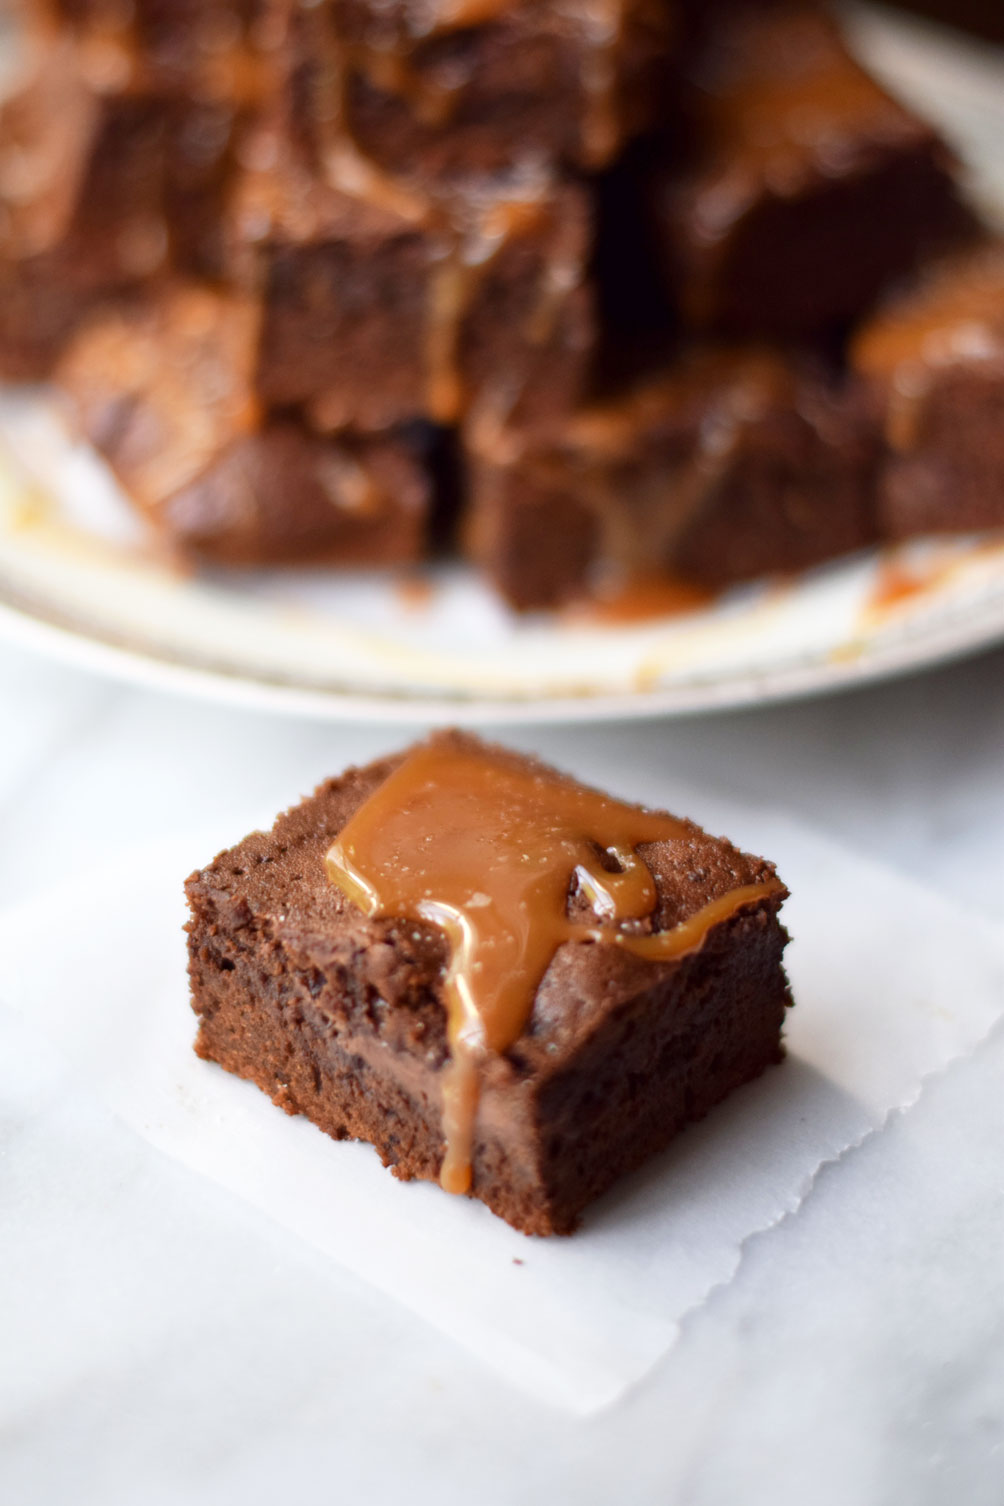 salted caramel nutella brownies are an easy and decadent chocolate dessert recipe from Leslie Musser of one brass fox